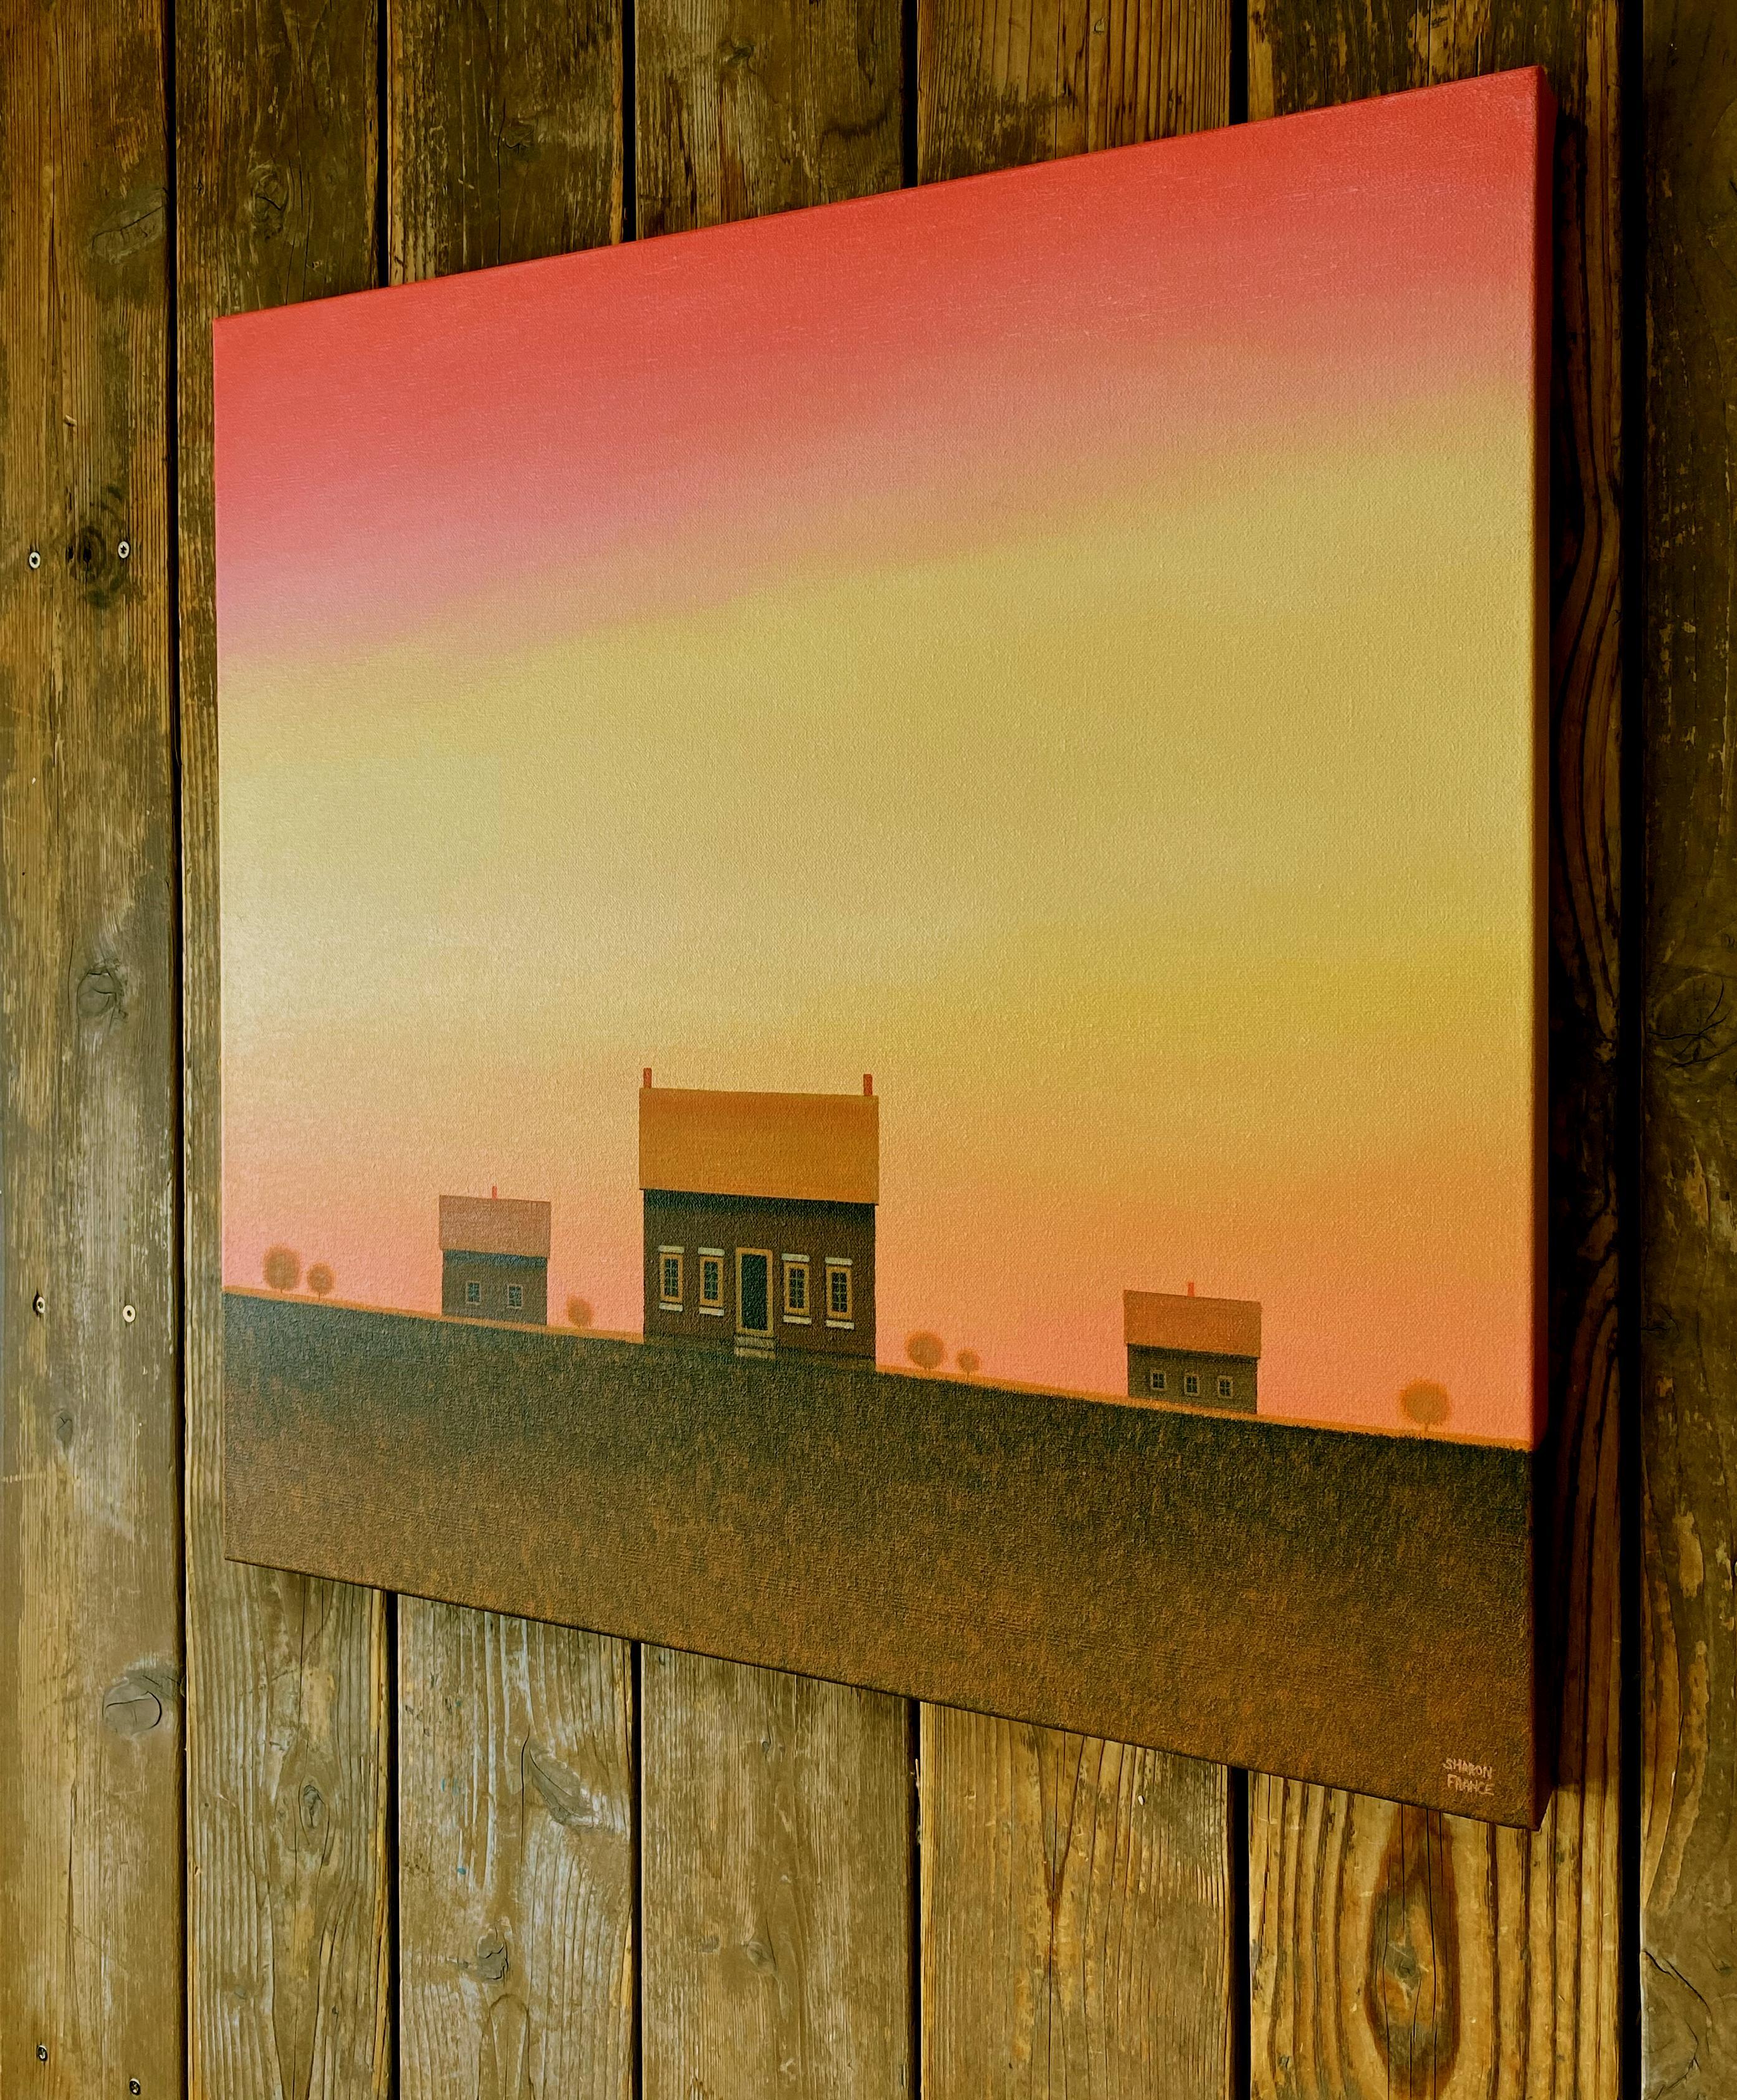 <p>Artist Comments<br>Artist Sharon France exhibits a modern image of a rustic old farmhouse, an old barn, and a shed. She paints the dreamy display from free imagination. The golden gradient fully captures the warmth of the whimsical evening sky.